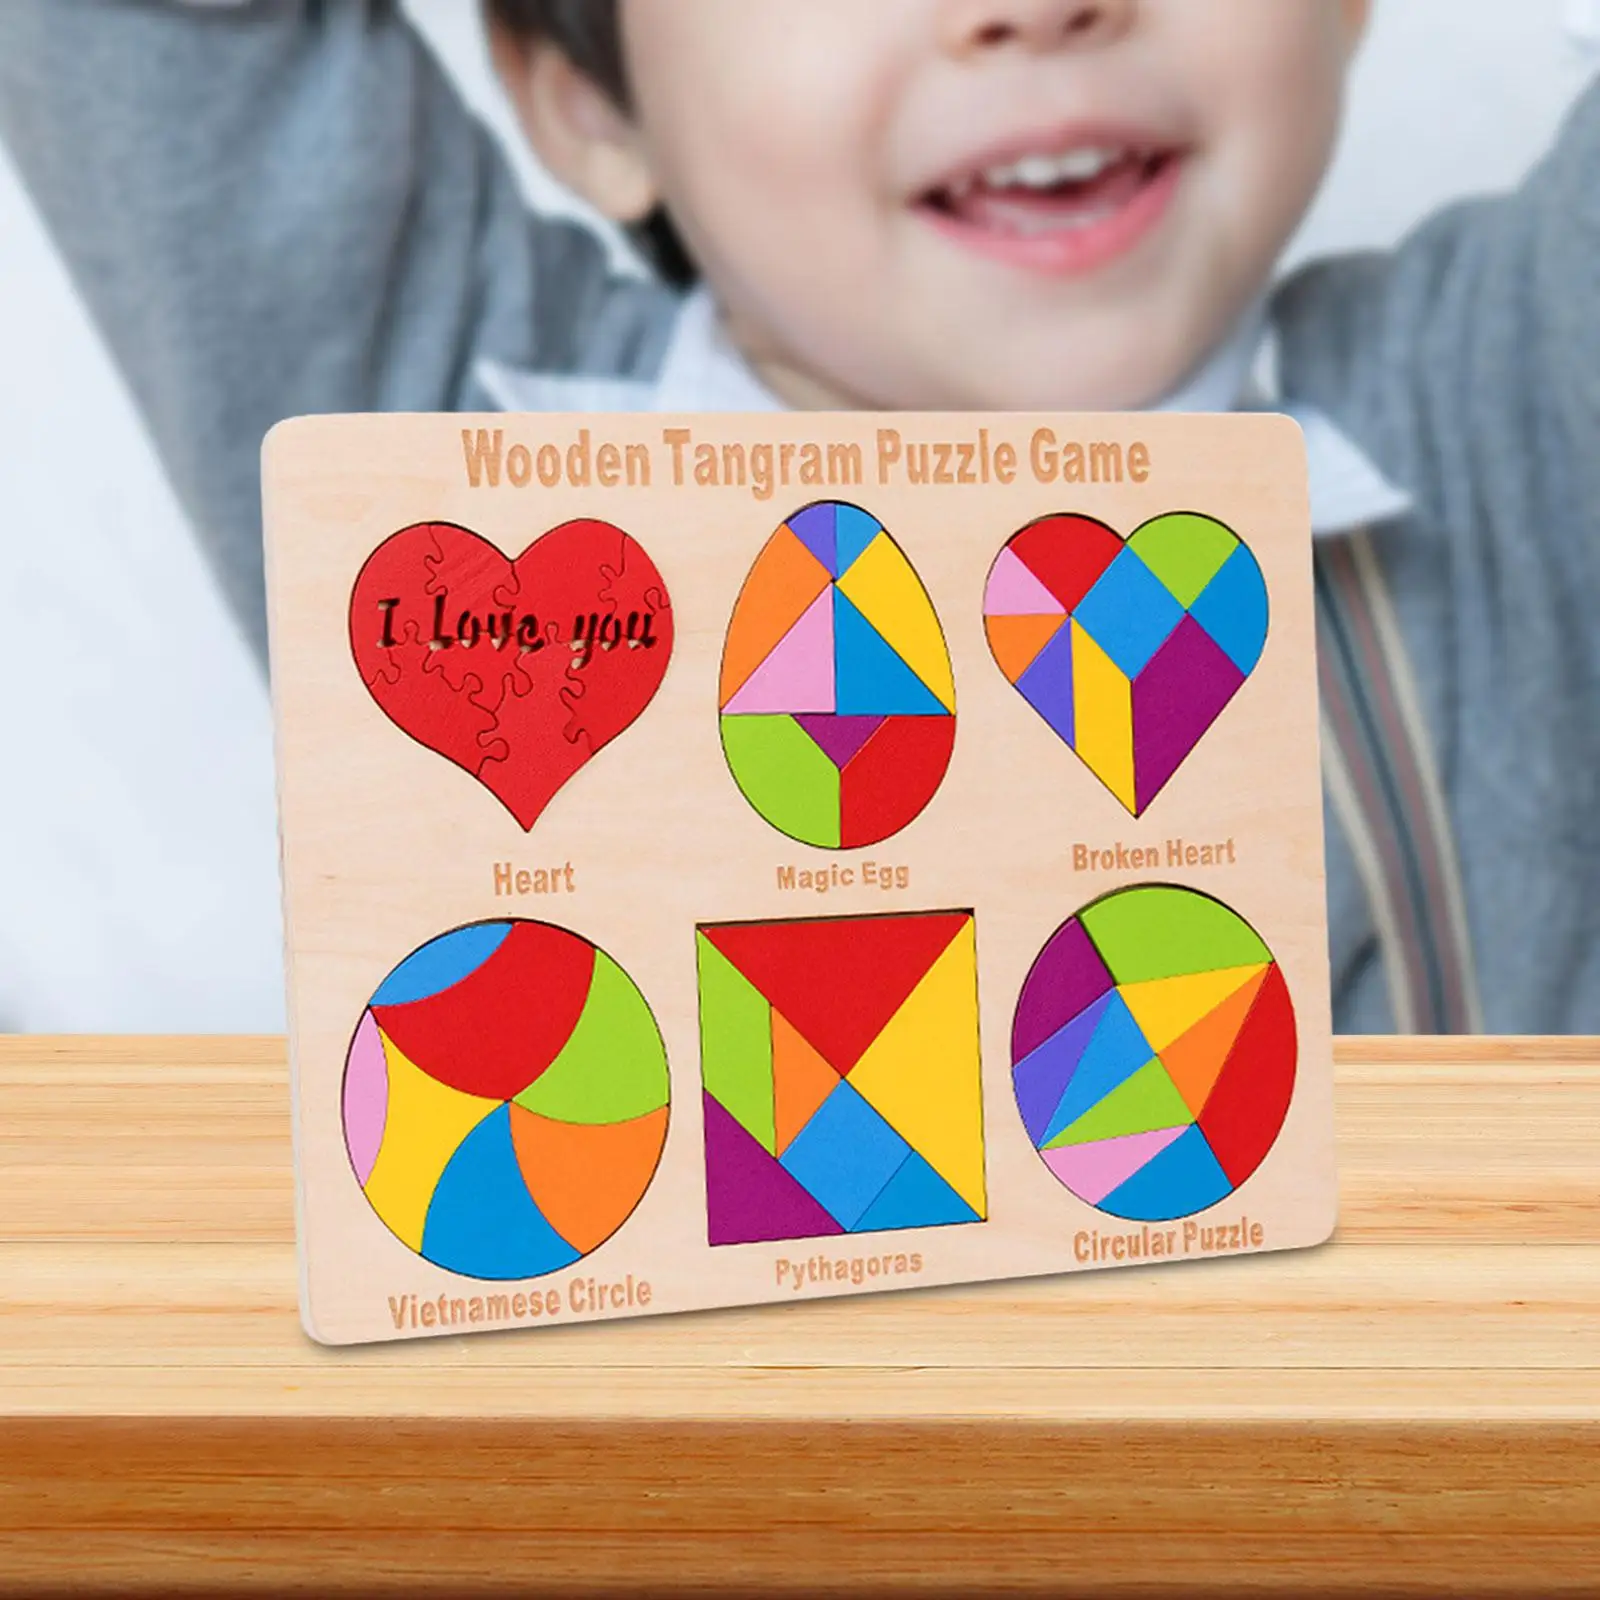 

Geometry Jigsaw 6 in 1 Birthday Gift Early Learning Montessori Wood Toy Wooden Tangram Puzzled Game Boys Girls Age 3+ Years Old